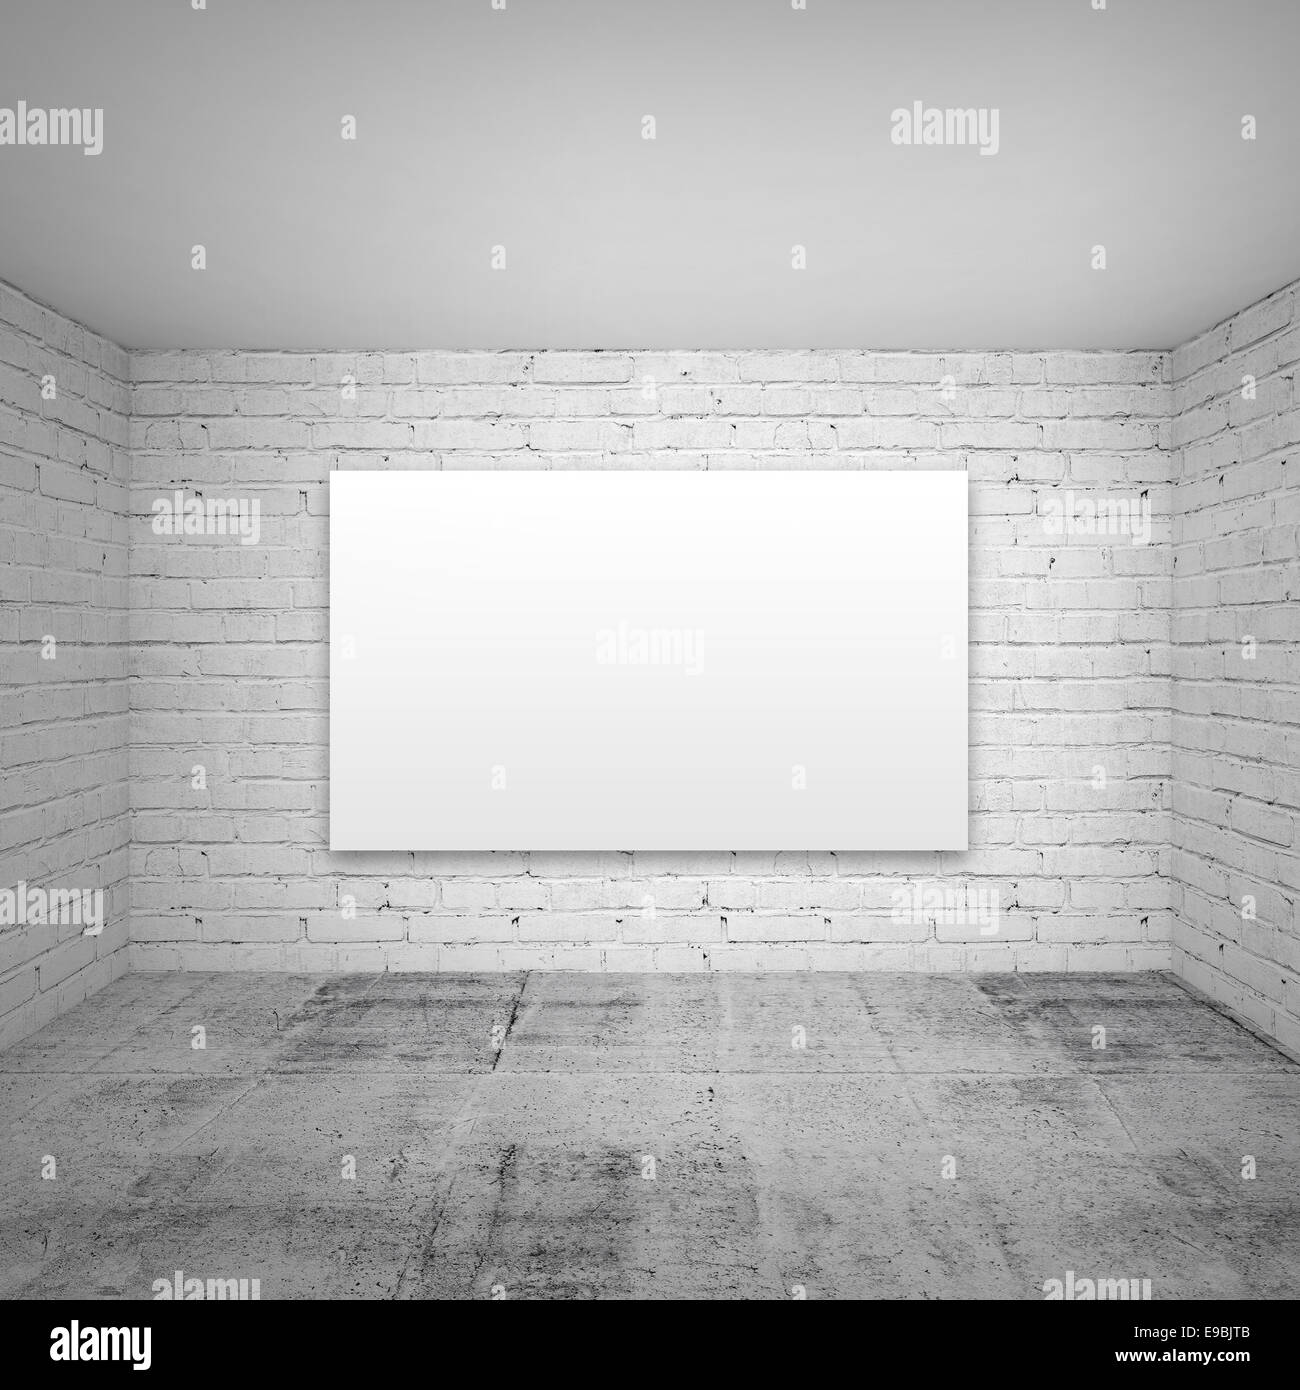 Empty white 3d room interior background with brick walls and concrete floor and empty poster Stock Photo